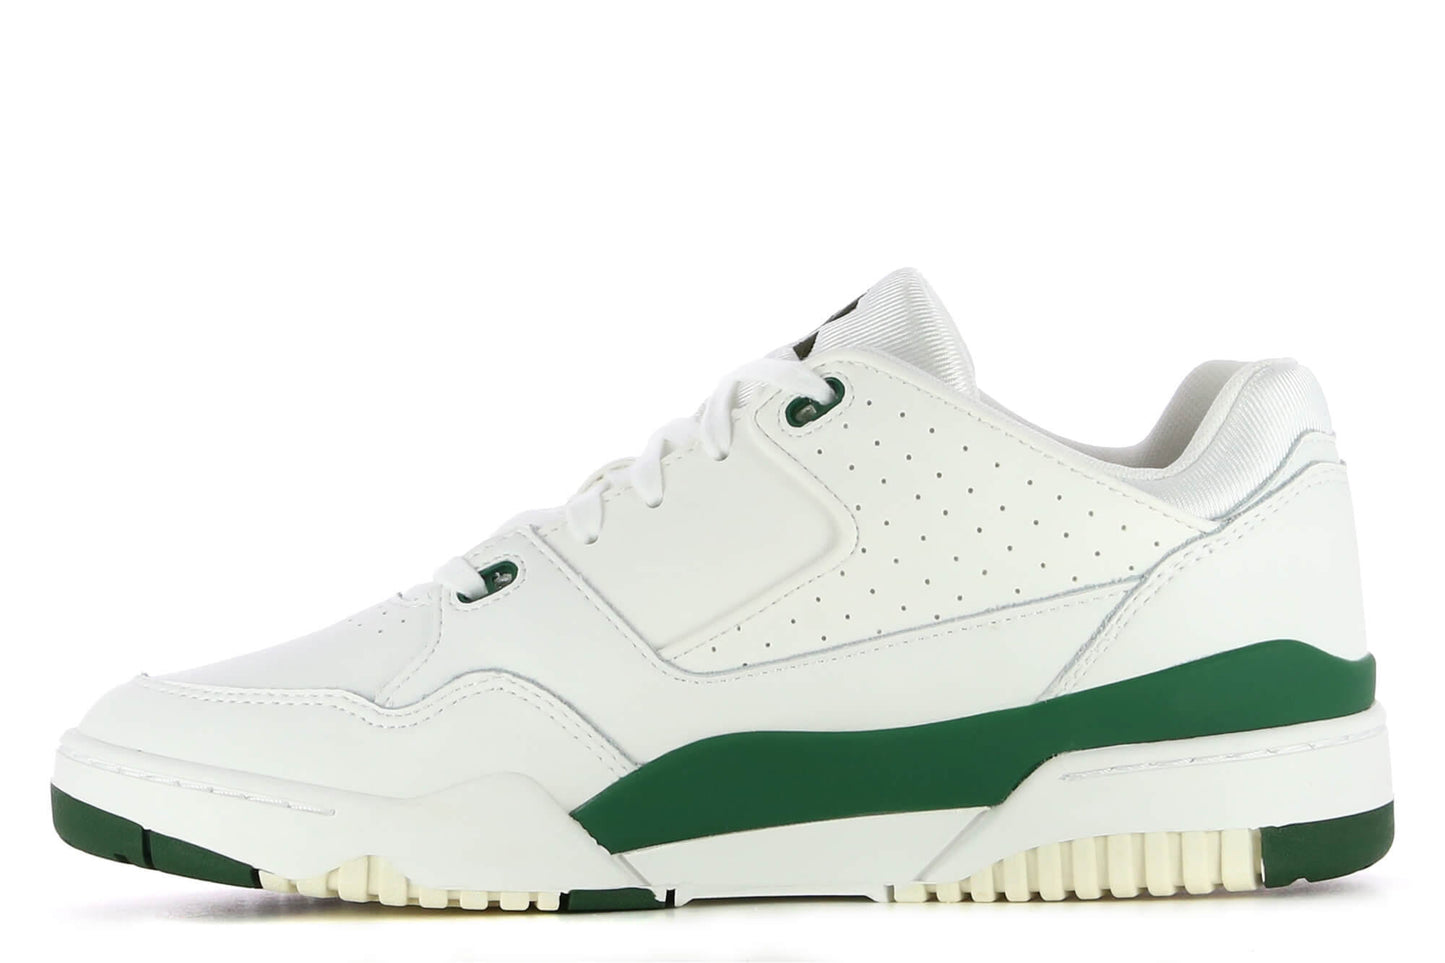 LE COQ SPORTIF LCS T1000 - Optical White Greener Pastures